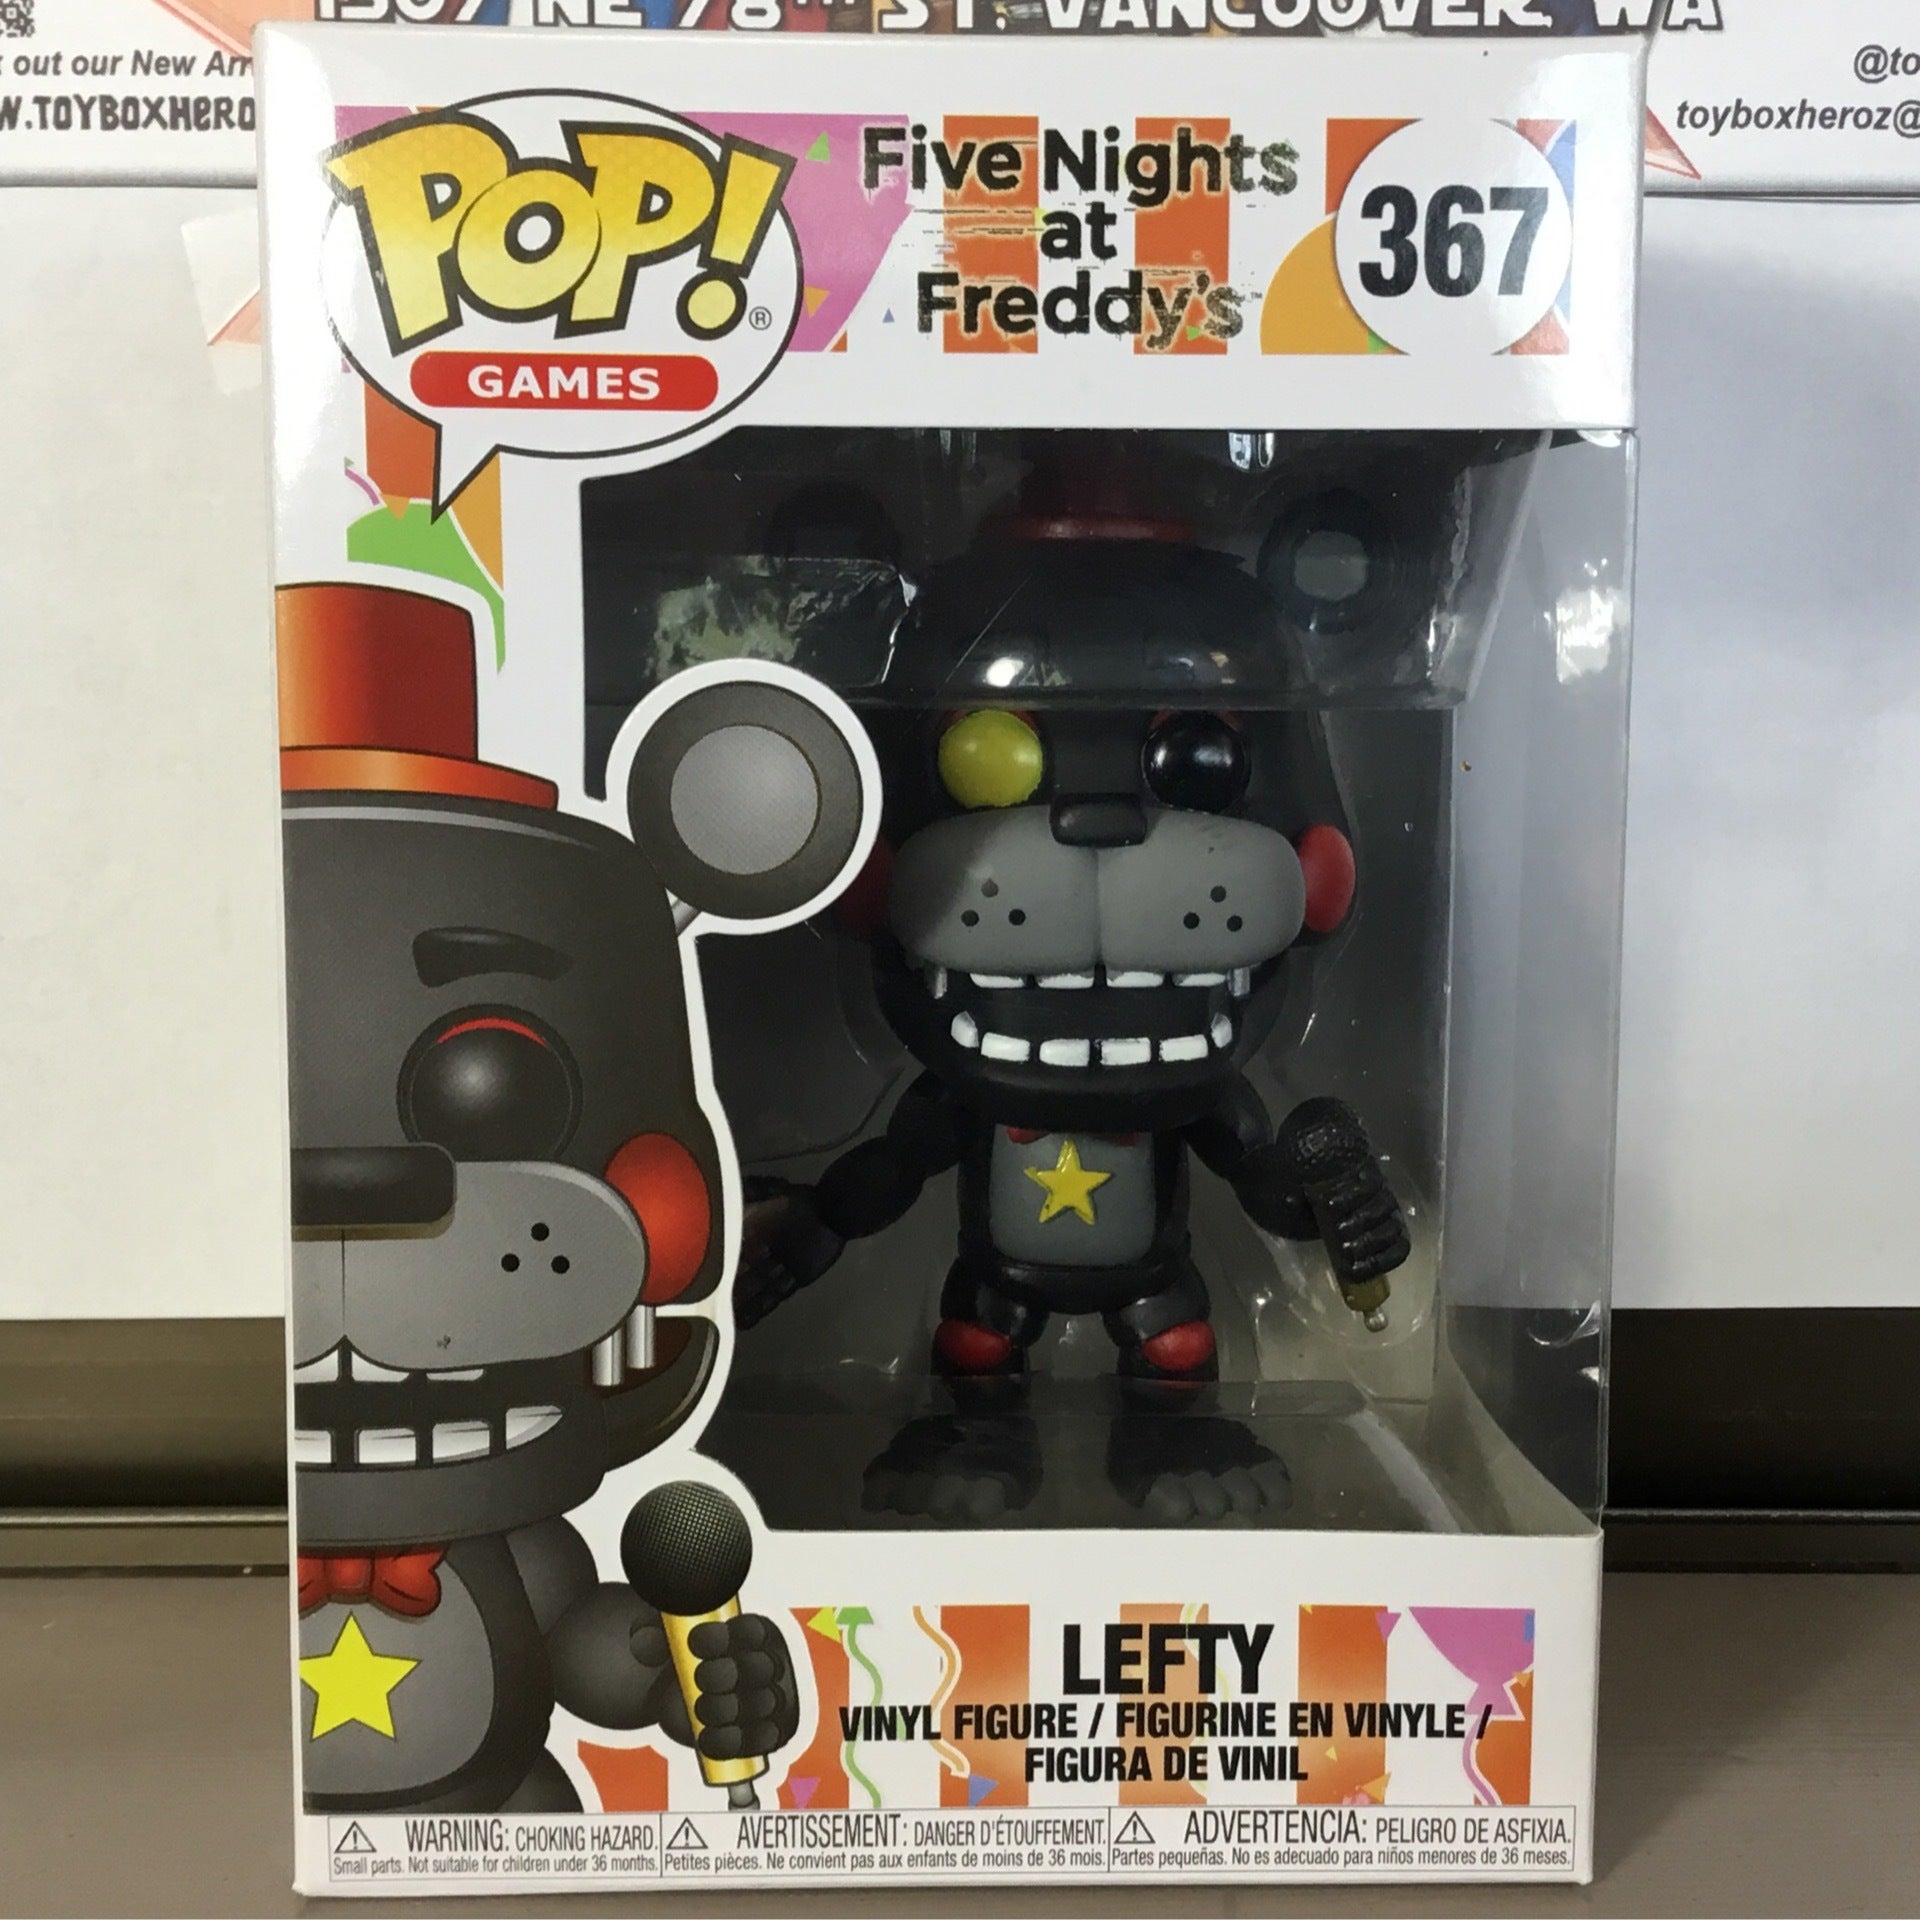 Figurine Pop Five Nights at Freddy's #367 pas cher : Lefty